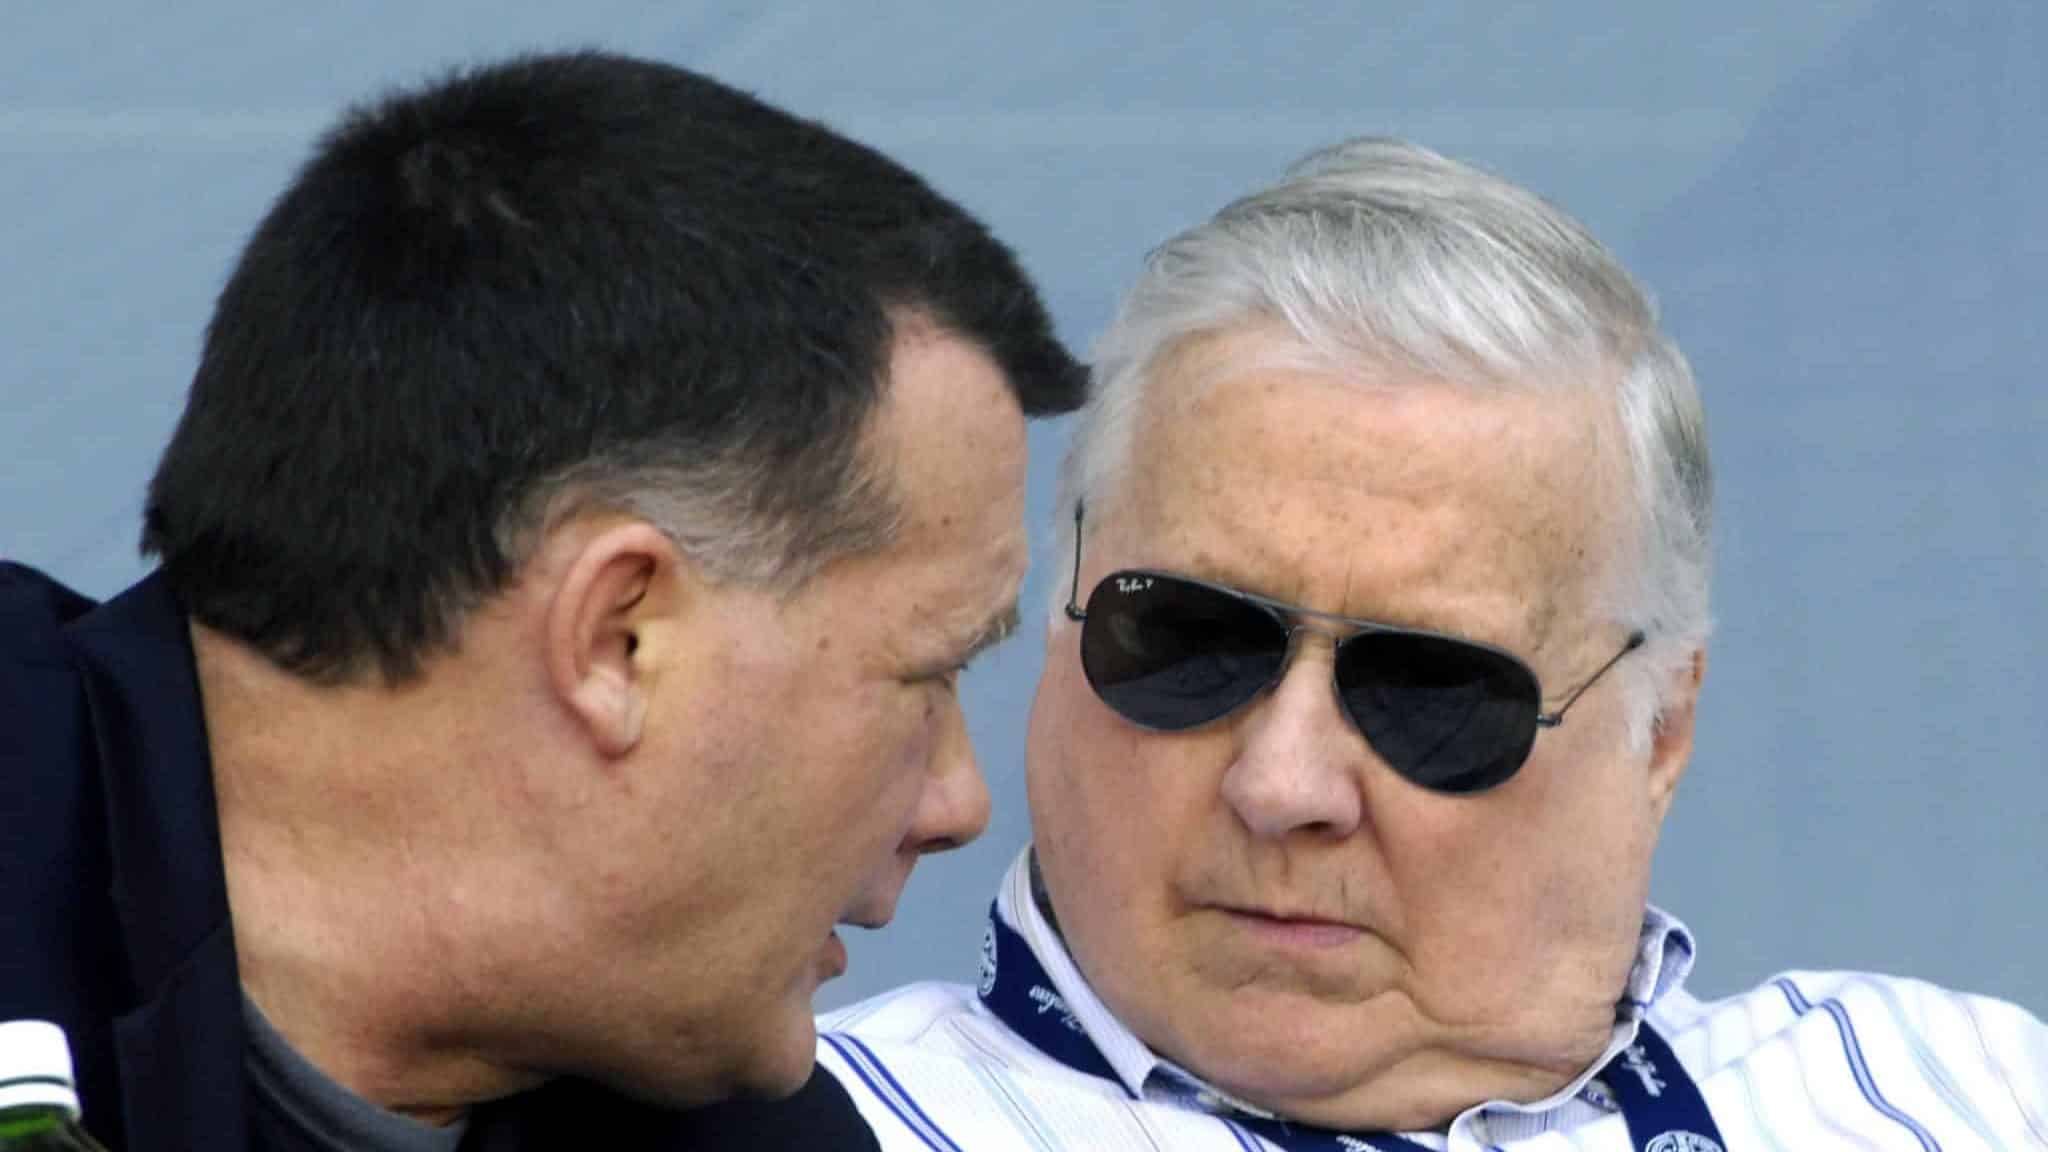 TAMPA, FL - APRIL 01: Owner George Steinbrenner of the New York Yankees talks with his son, Hank, against the Philadelphia Phillies at George Steinbrenner Field April 1, 2009 in Tampa, Florida.